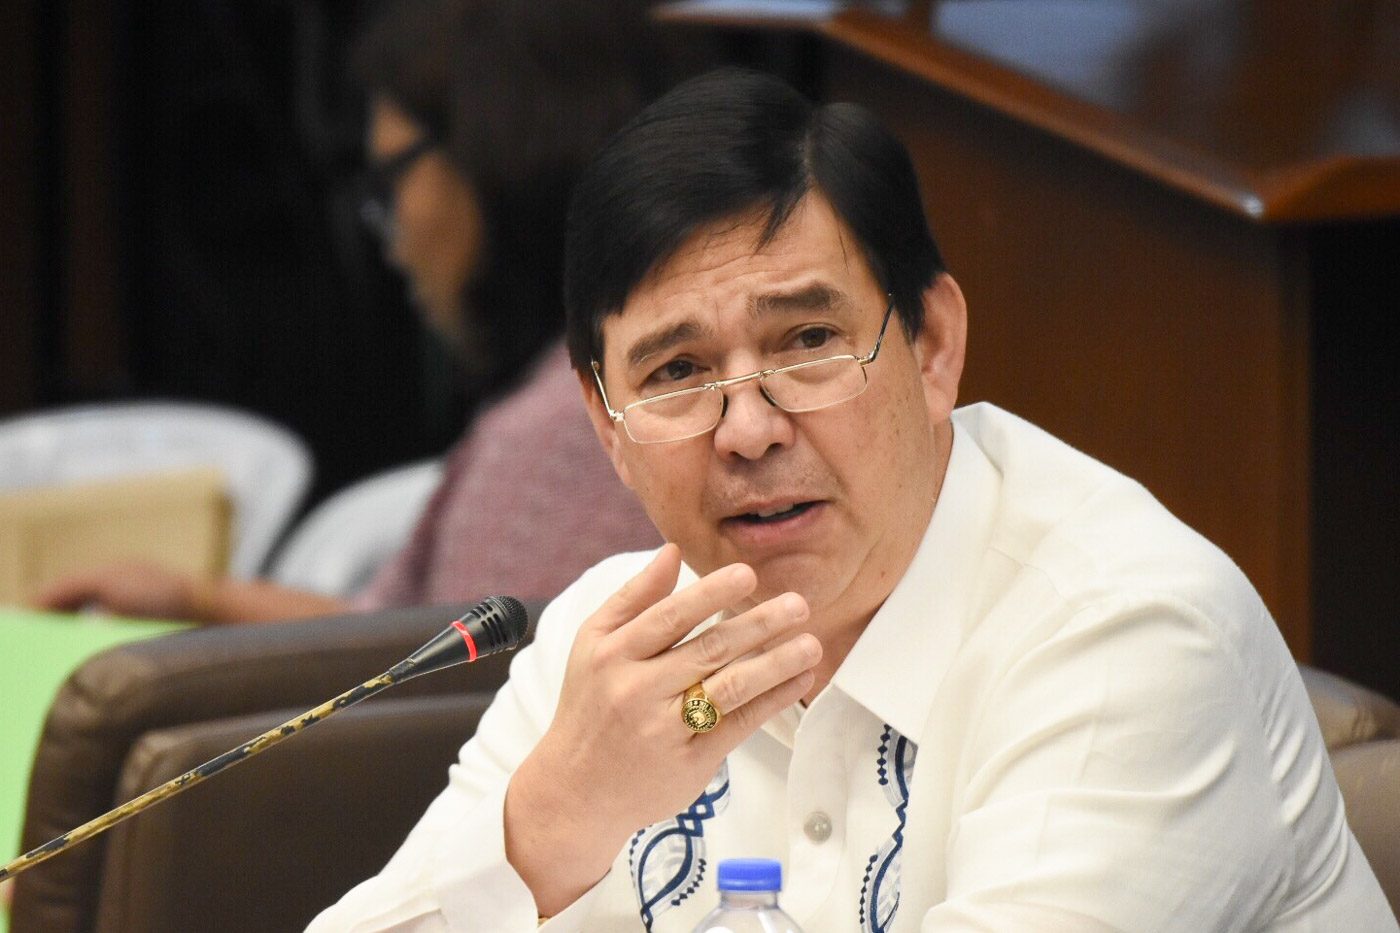 WIN-WIN? Senator Ralph Recto says the country should consider paying extra so the Navy can get a superior CMS for the ships. Photo by Angie de Silva/Rappler 